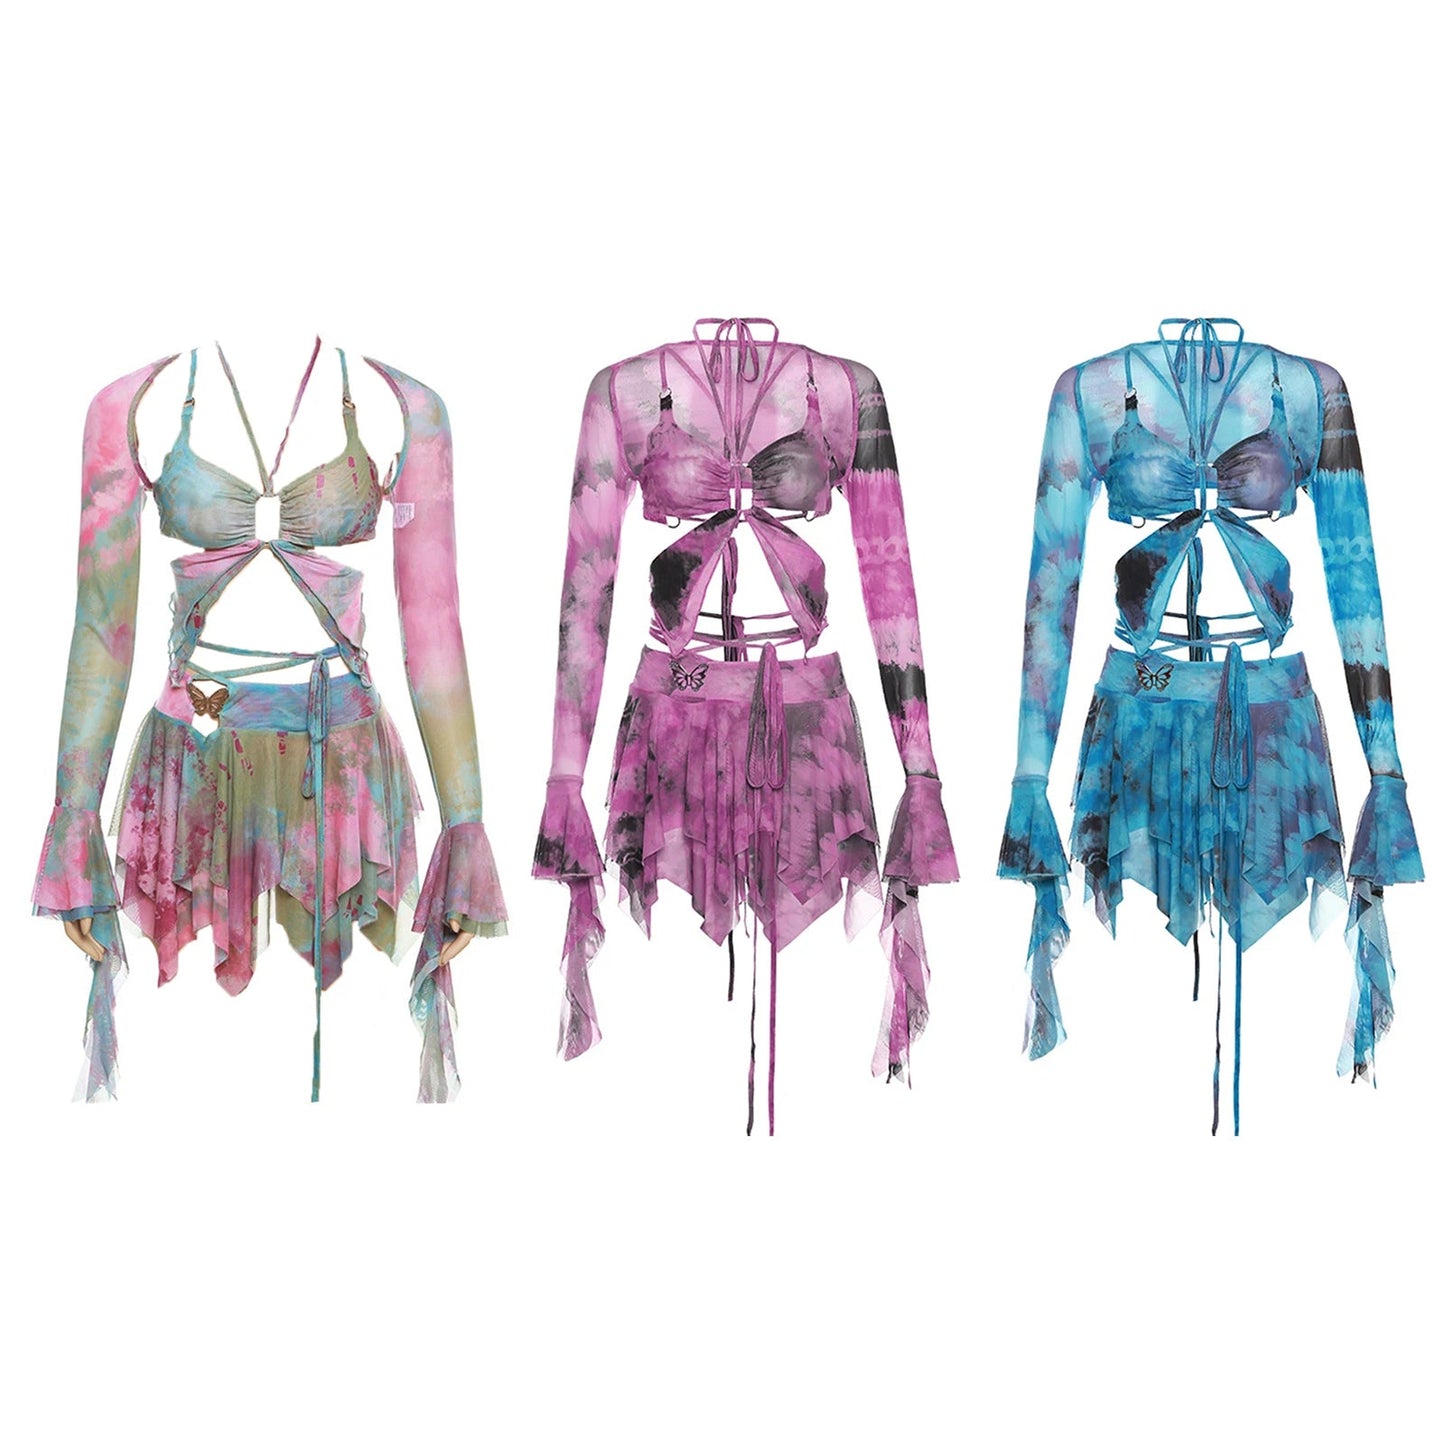 Women's Colorful Outfit Irregular 3 Piece Matching Set - The Rave Cave